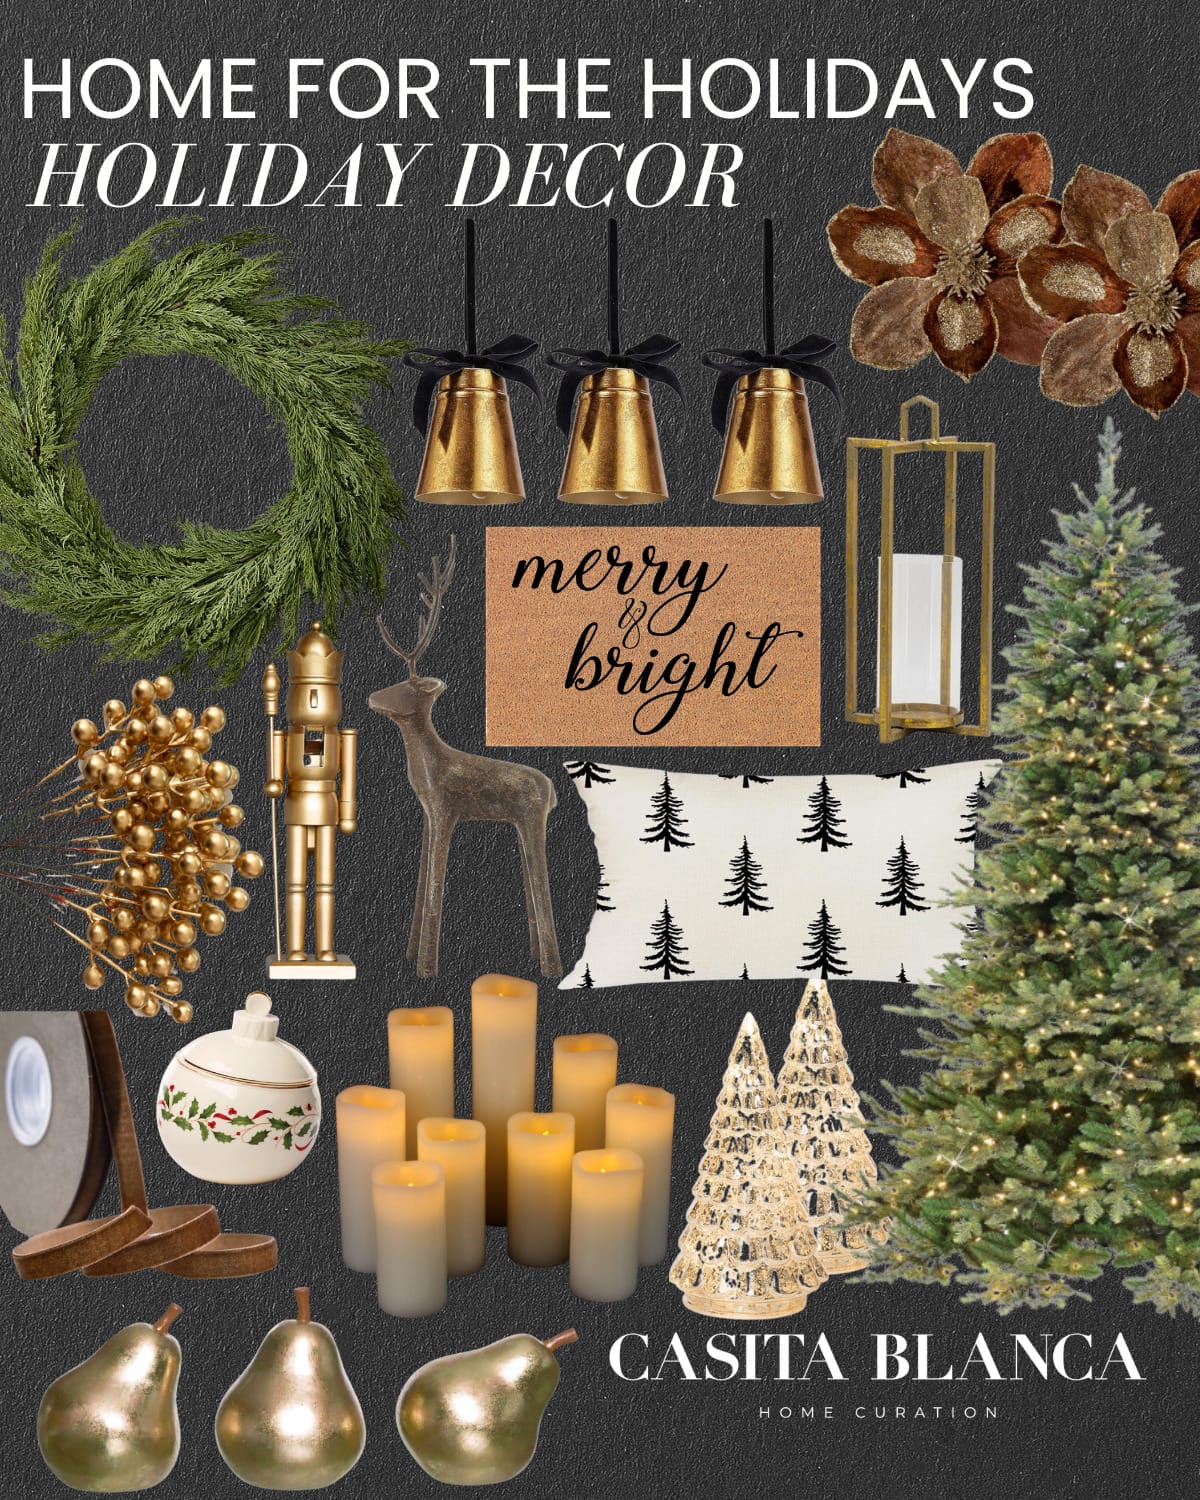 home for the holidays holiday decor | #home #holidays #christmas #holidaydecor #holidayhome #christmastree #wreath #nutcracker #pillow #bells #merry #bright